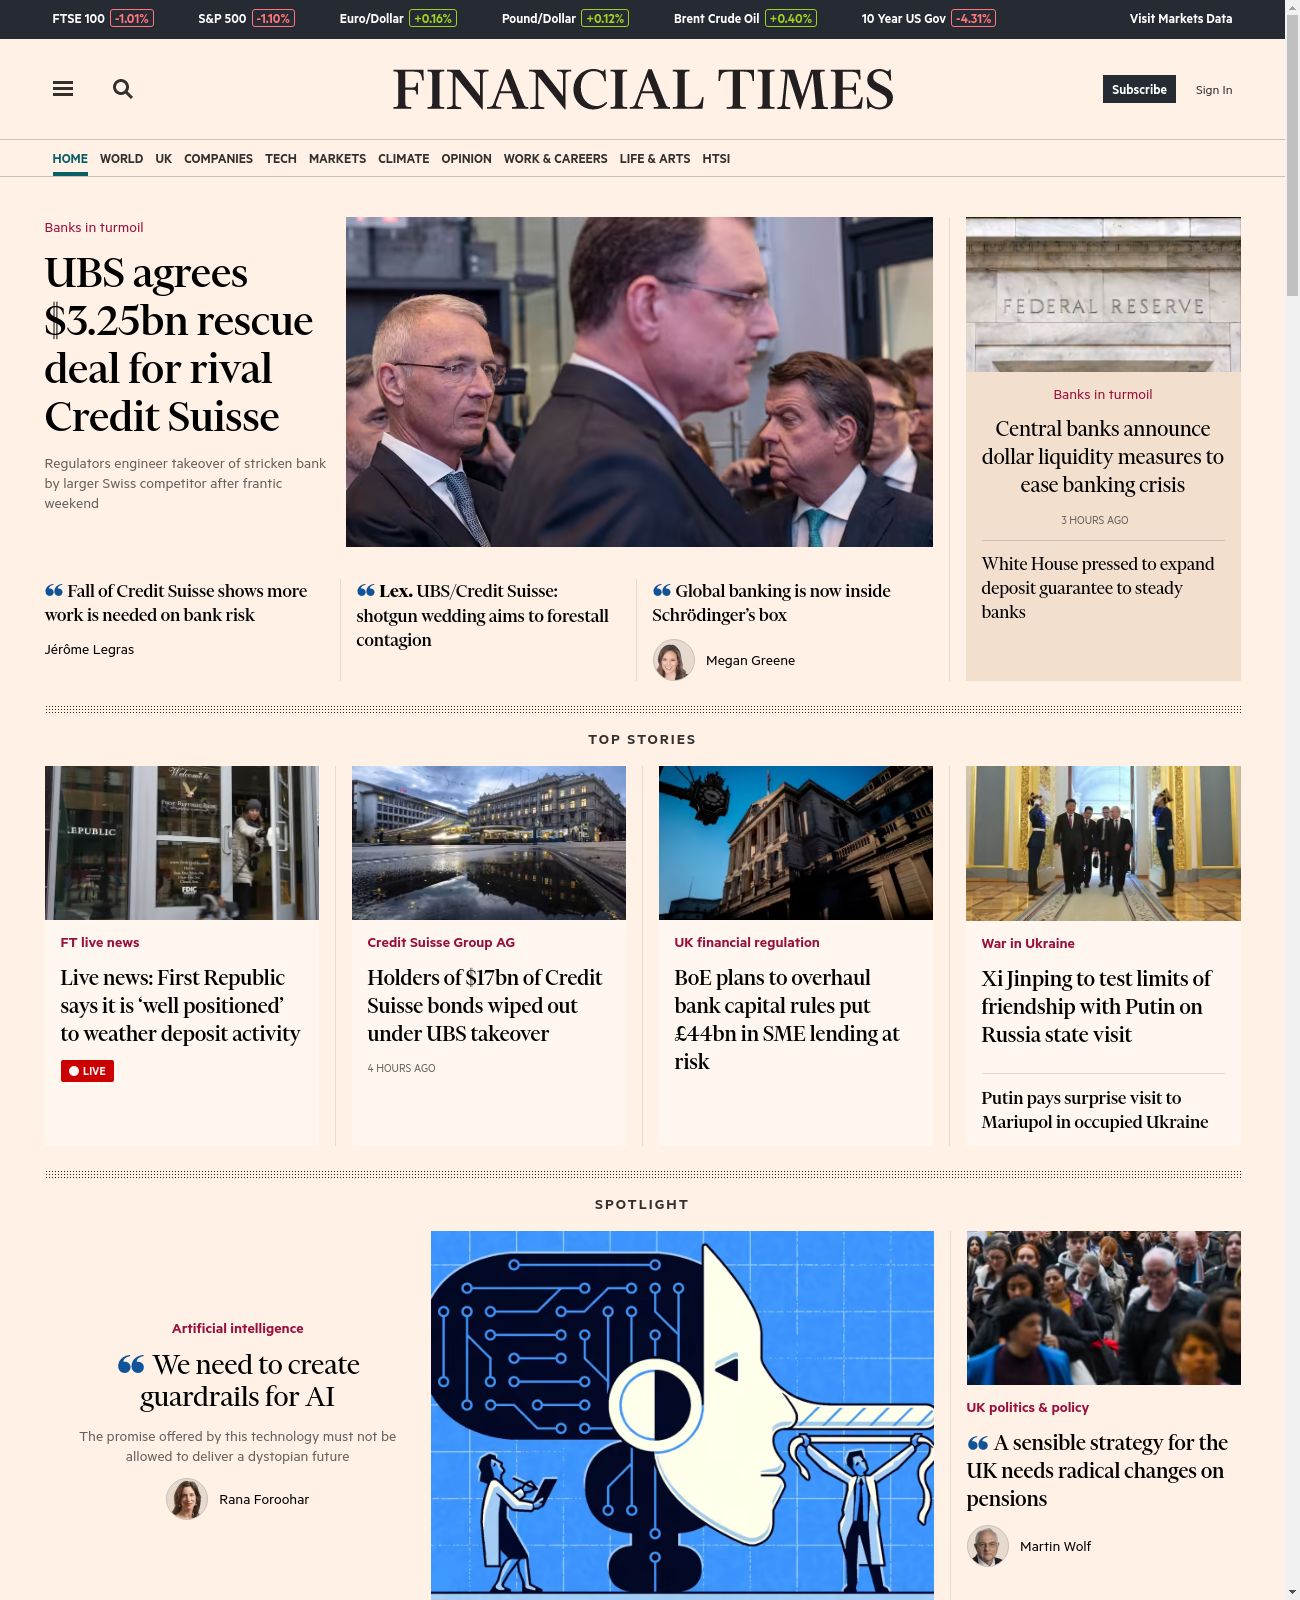 Financial Times at 2023-03-20 01:54:25+00:00 local time